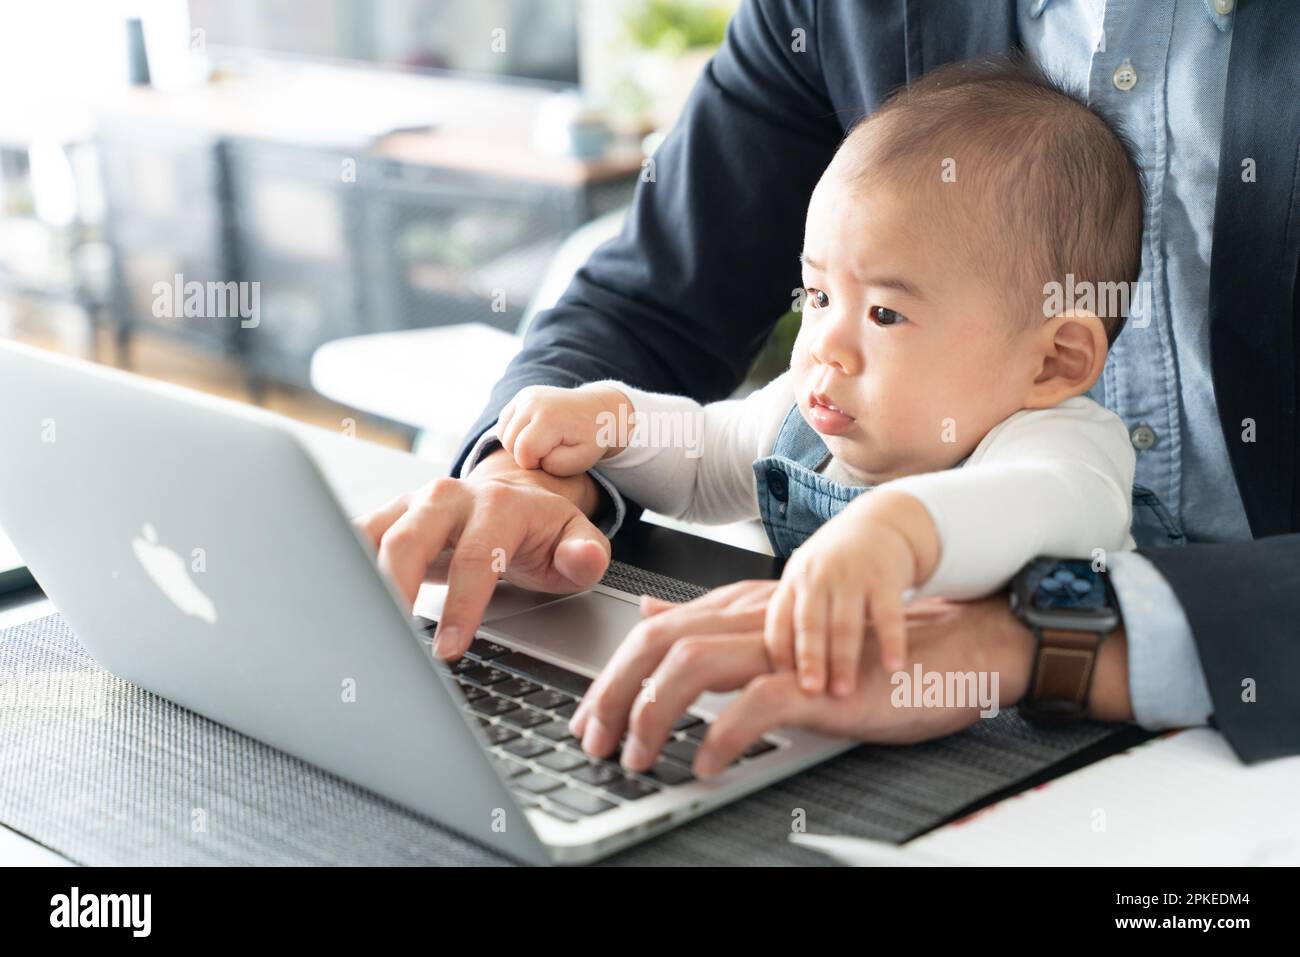 Baby boy looking at computer while being carried by his father Stock Photo